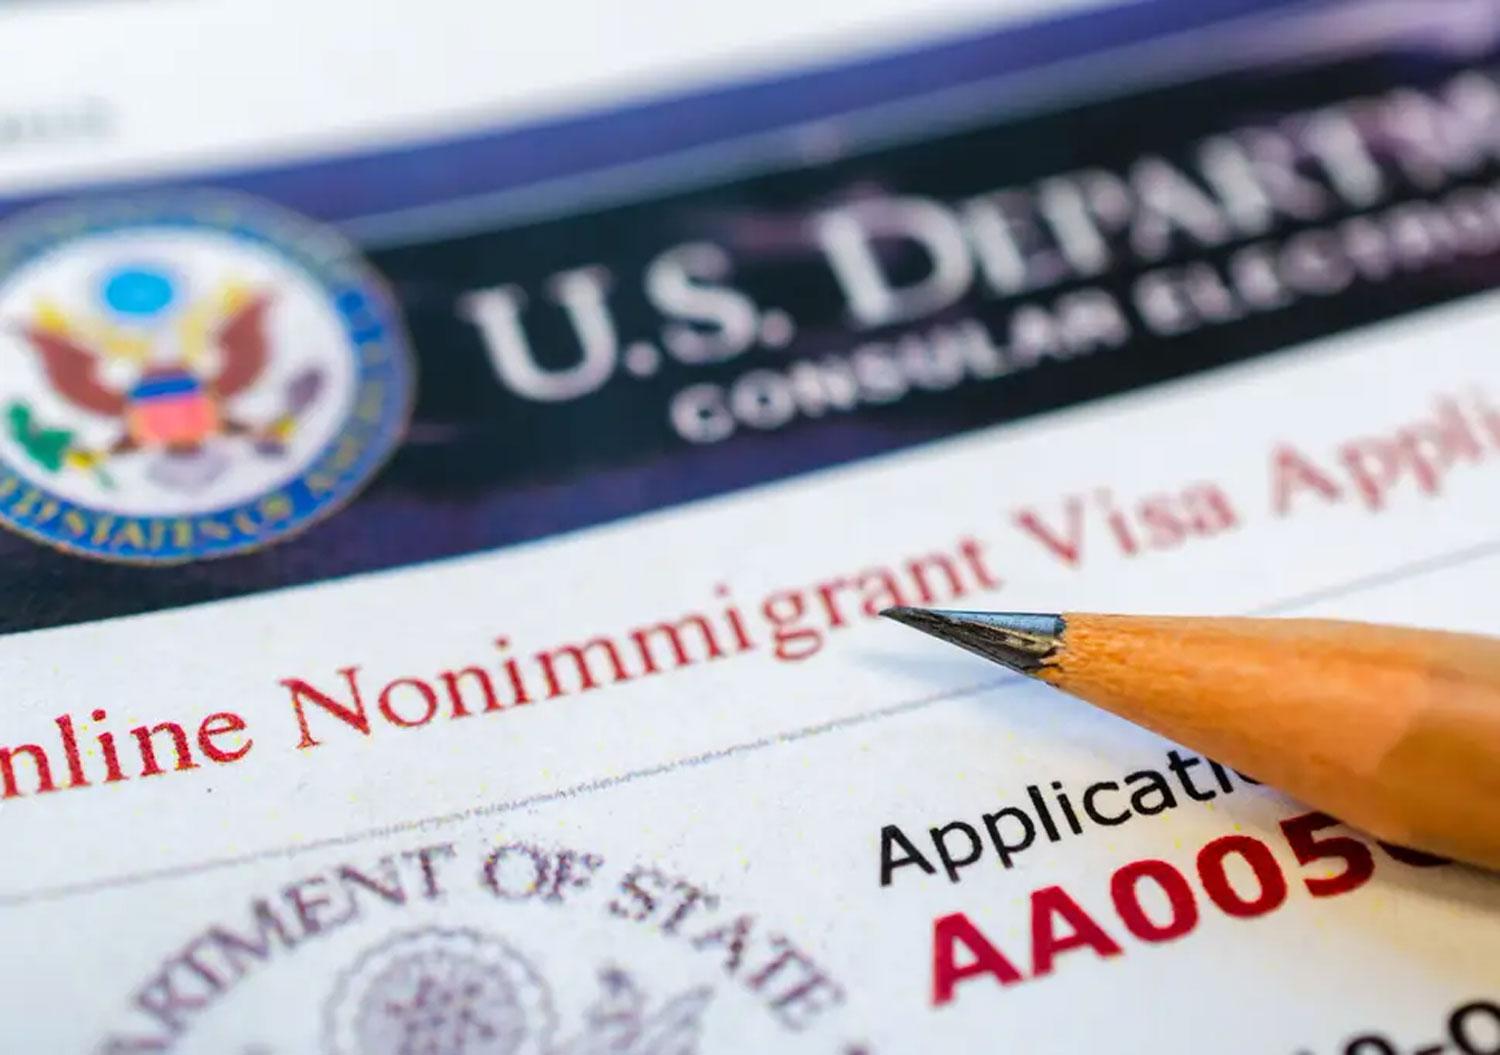 Nigerian Candidates Face Elevated US Nonimmigrant Visa Denials Amido Solid Paperwork, others